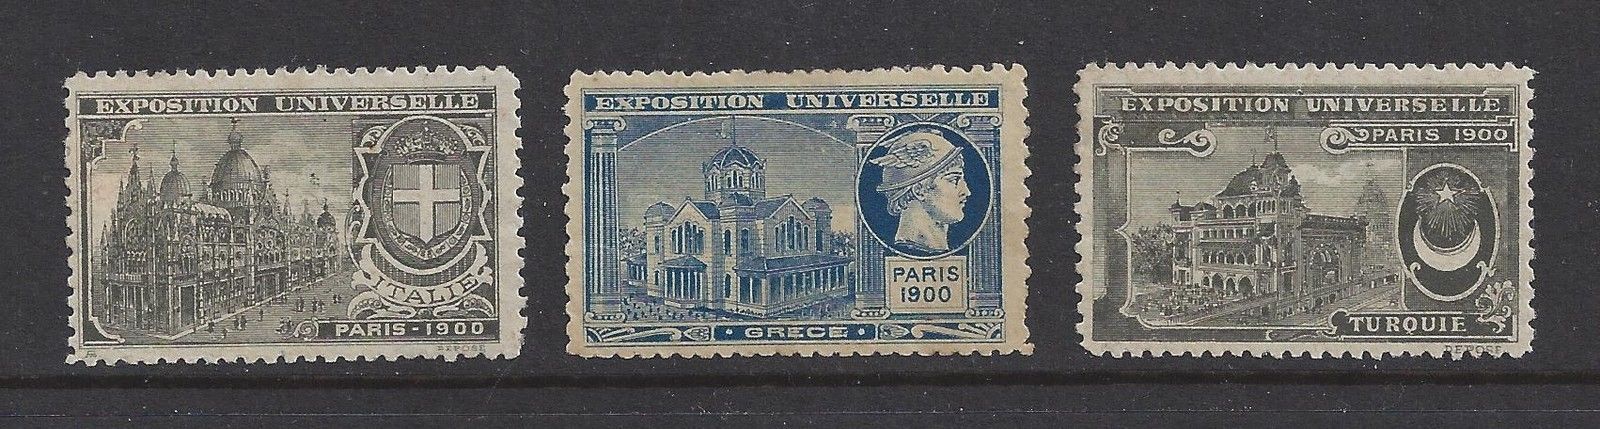 Paris 1900 Expo Labels for Italy, Greece and Turkey